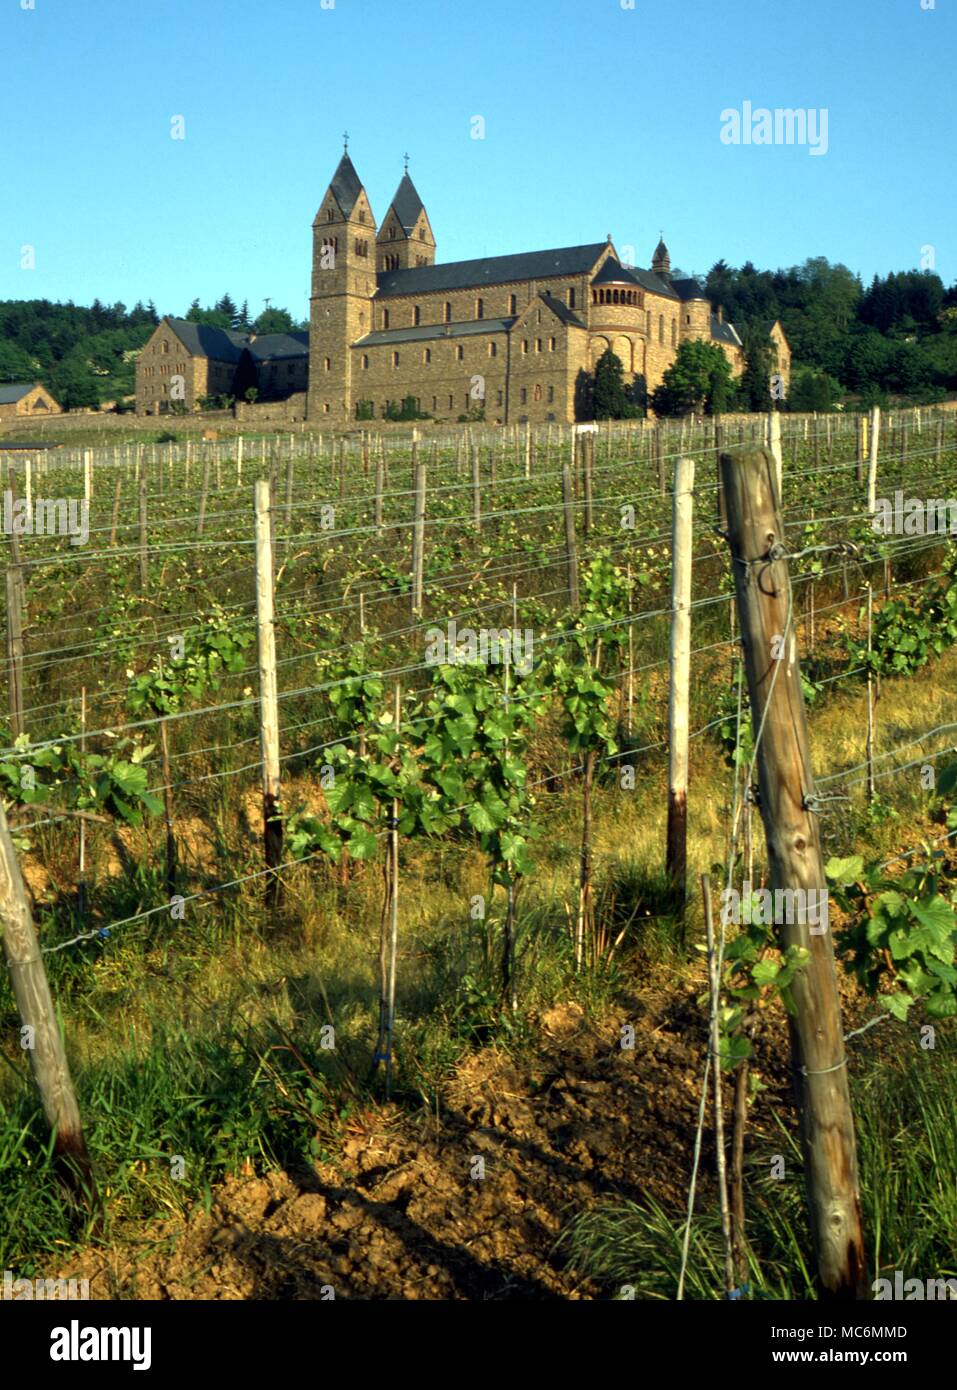 Medical - One of the most famous herbal gardens of the medieval period was that run by the esotericist abbess, Hildegard of Bingen, who wrote books on curative herbs. This is the new 'Hildegarde' abbey, at Rudesheim. Stock Photo